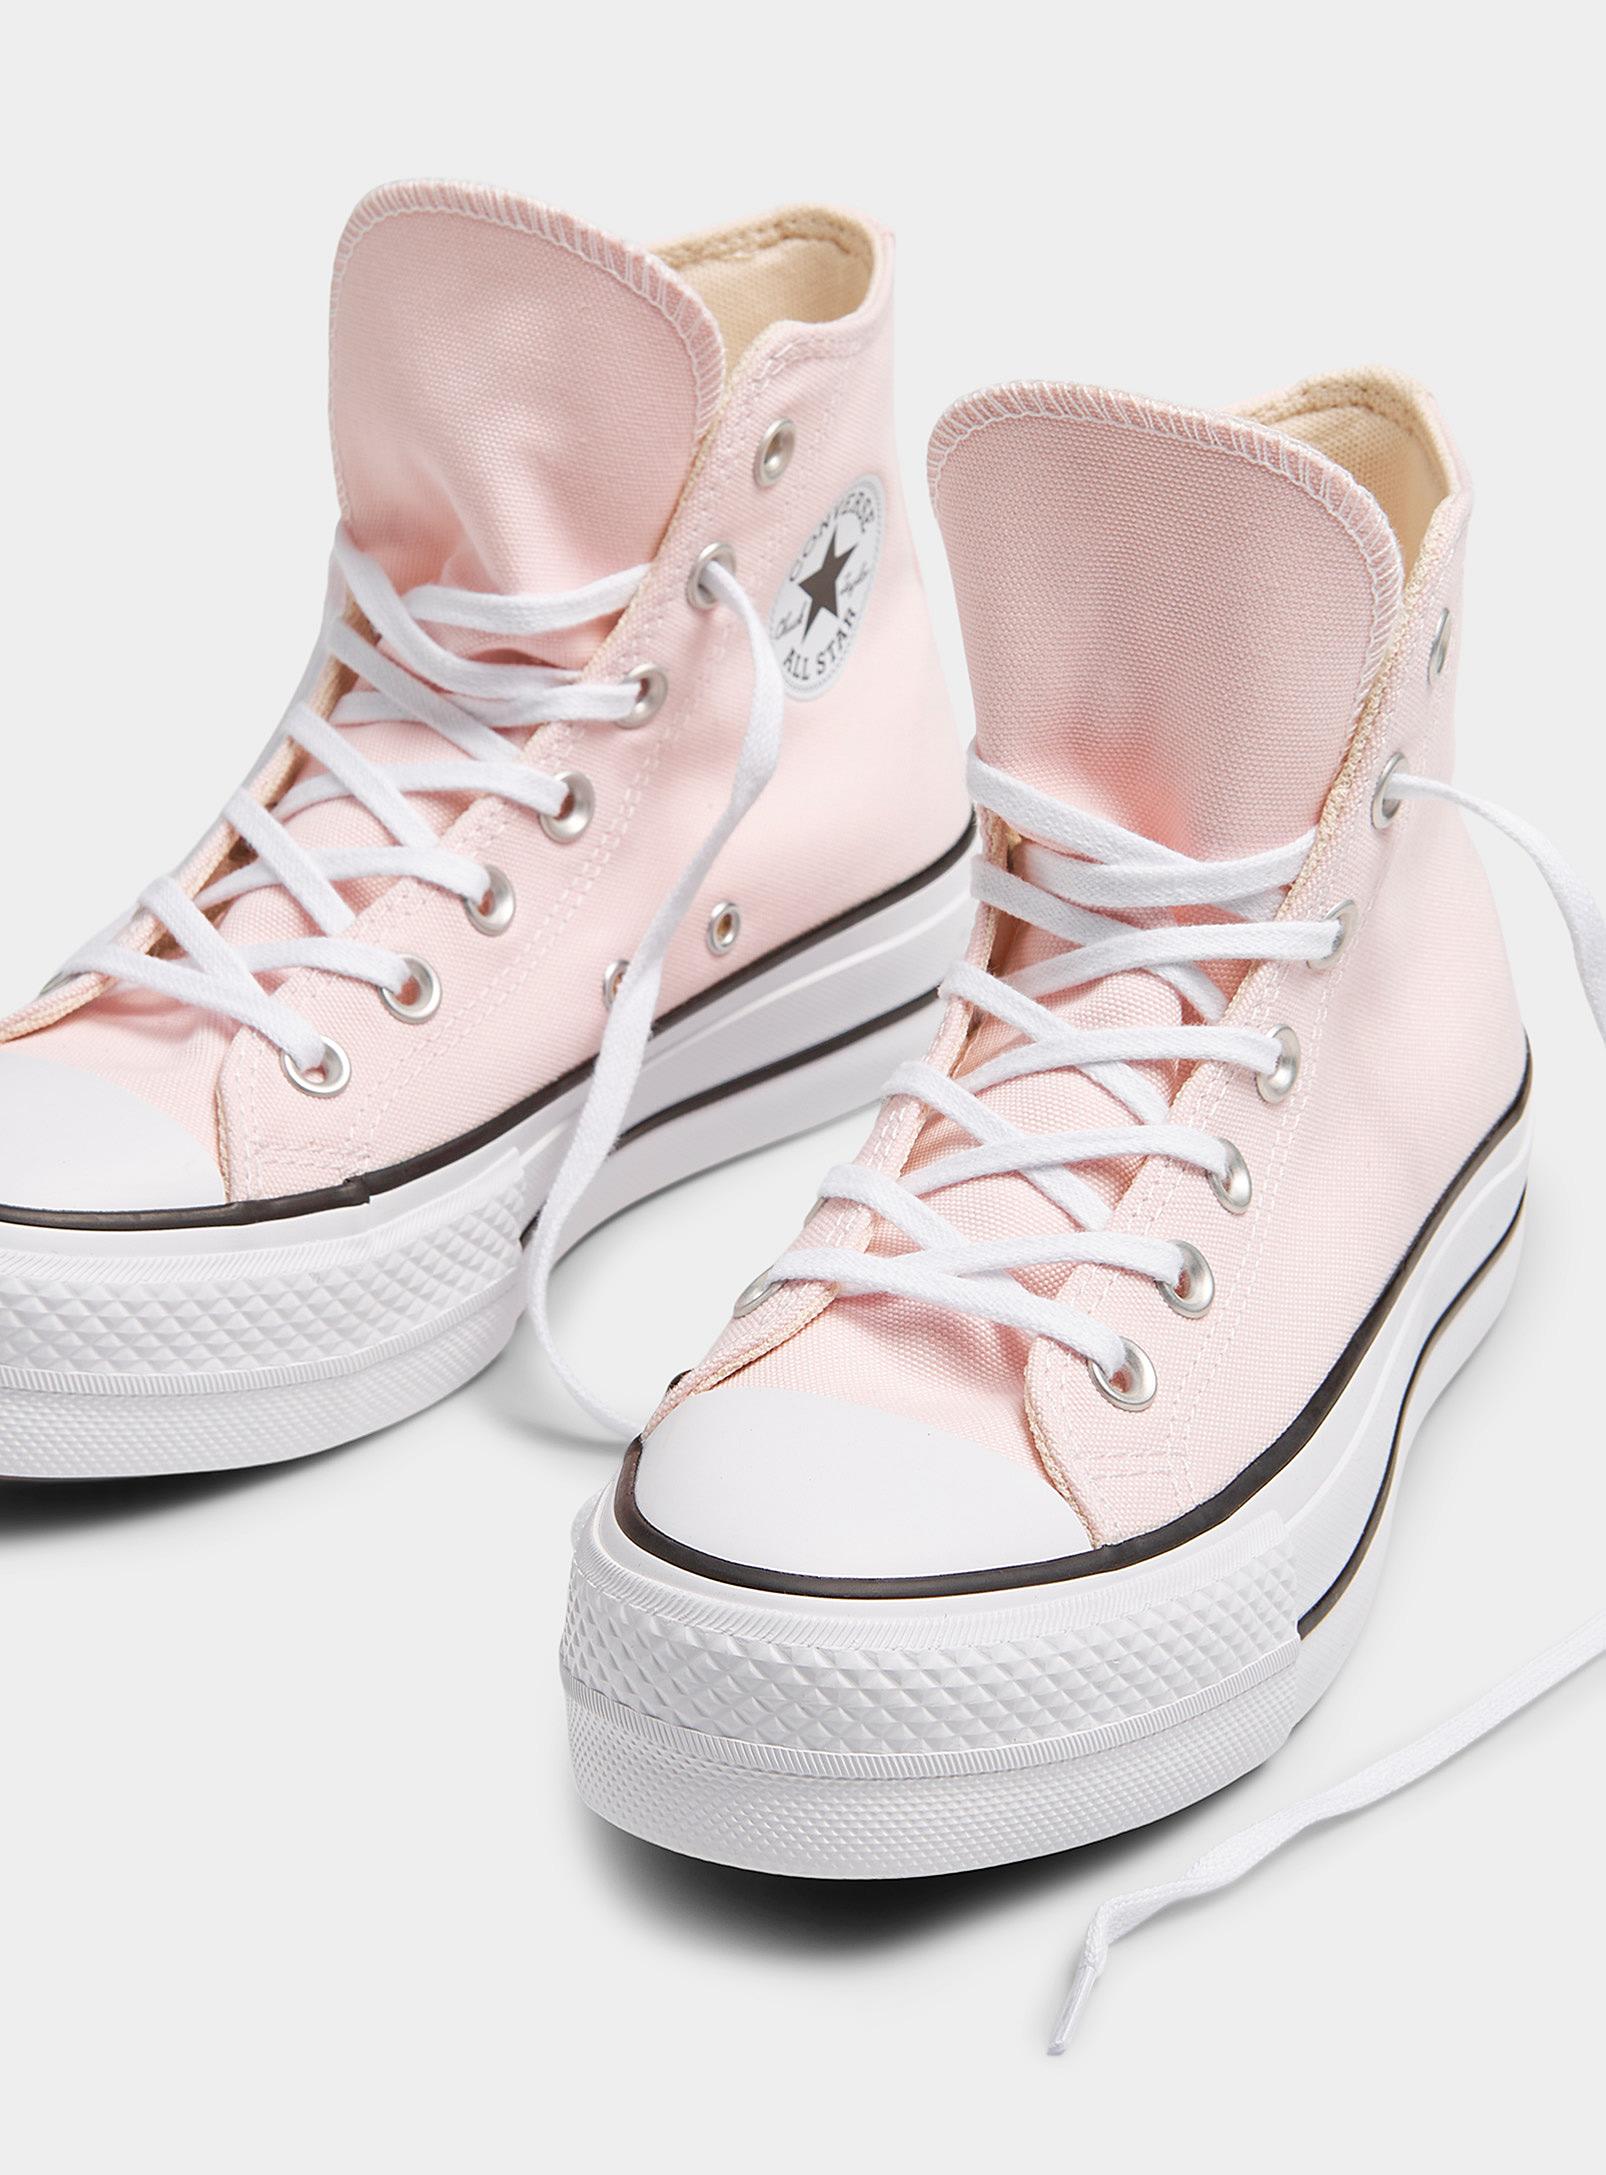 Converse Chuck Taylor All Star Lift Powder Pink Platform Sneakers Women in Natural | Lyst